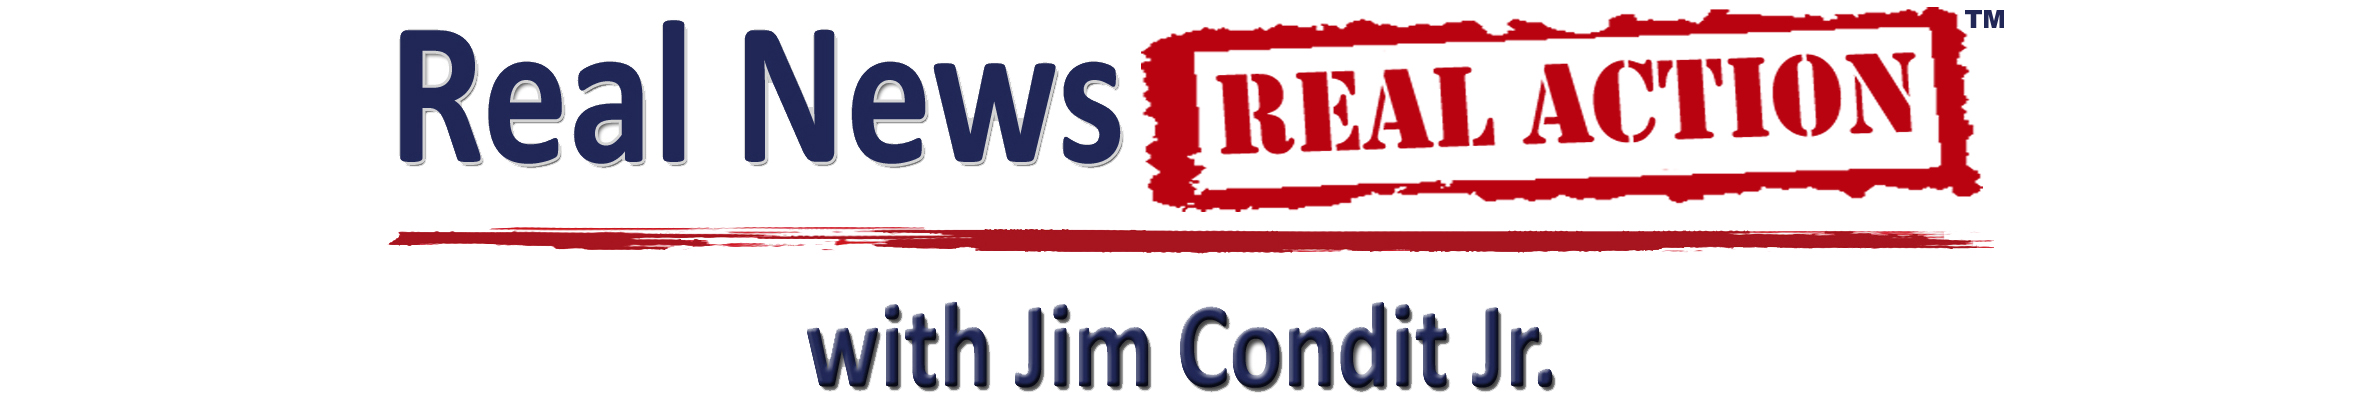 Real News Real Action with Jim Condit Jr.